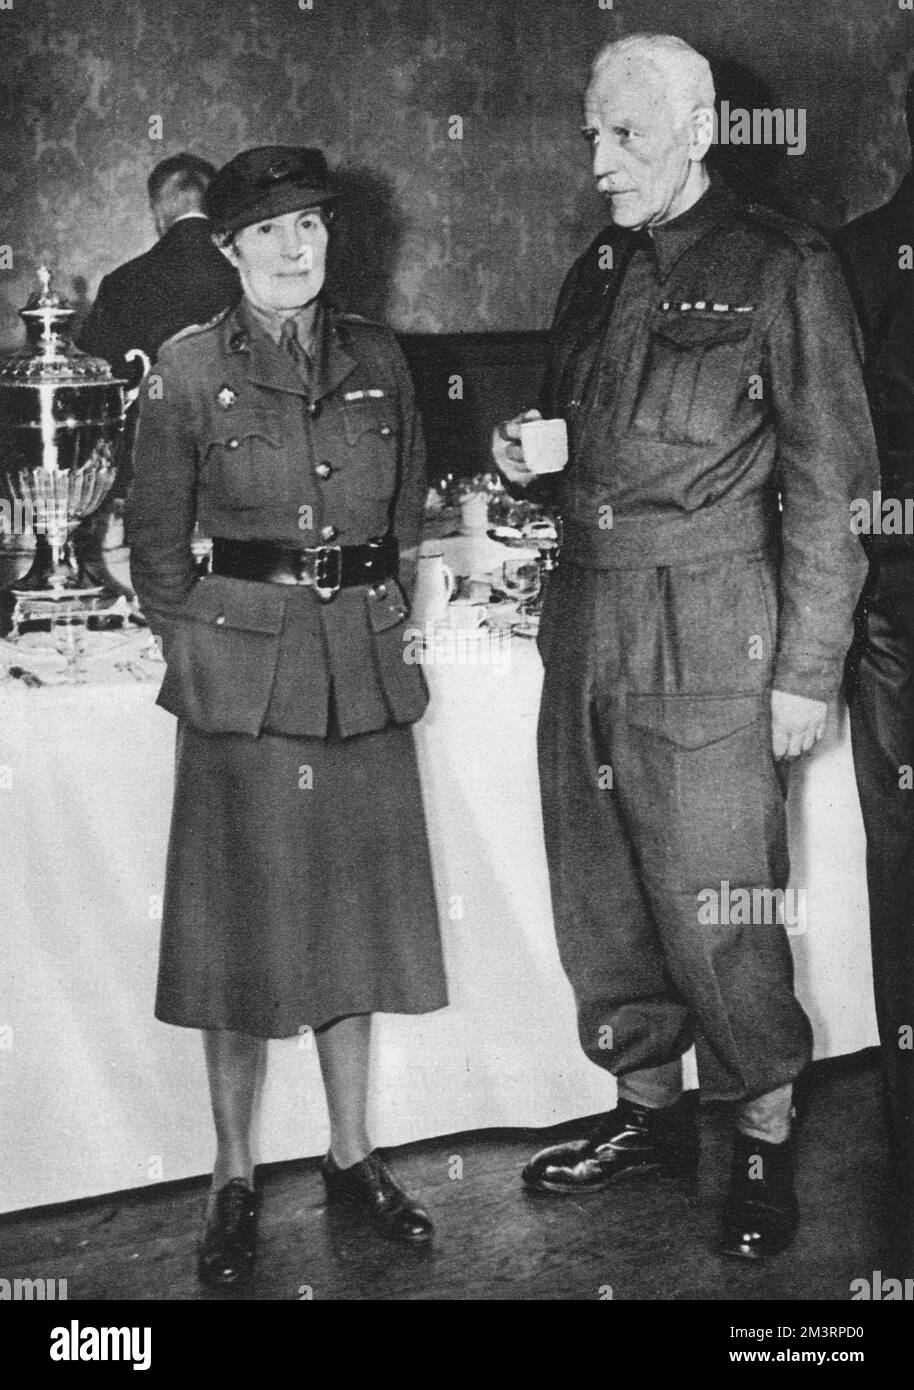 David Bertram Ogilvy Freeman-Mitford, 2nd Baron Redesdale (13 March 1878  17 March 1958), pictured in Home Guard uniform at the wedding of his youngest daughter, Deborah (Debo) to Lord Andrew Cavendish in 1941.  He is standing next to his sister-in-law by marriage, Mrs G. Bowles. The wedding reception was held at the Redesdales' London home, 26, Rutland Gate.  Lord Redesdale was known by his six daughters, the famous Mitford Sisters, as Farve.     Date: 1941 Stock Photo